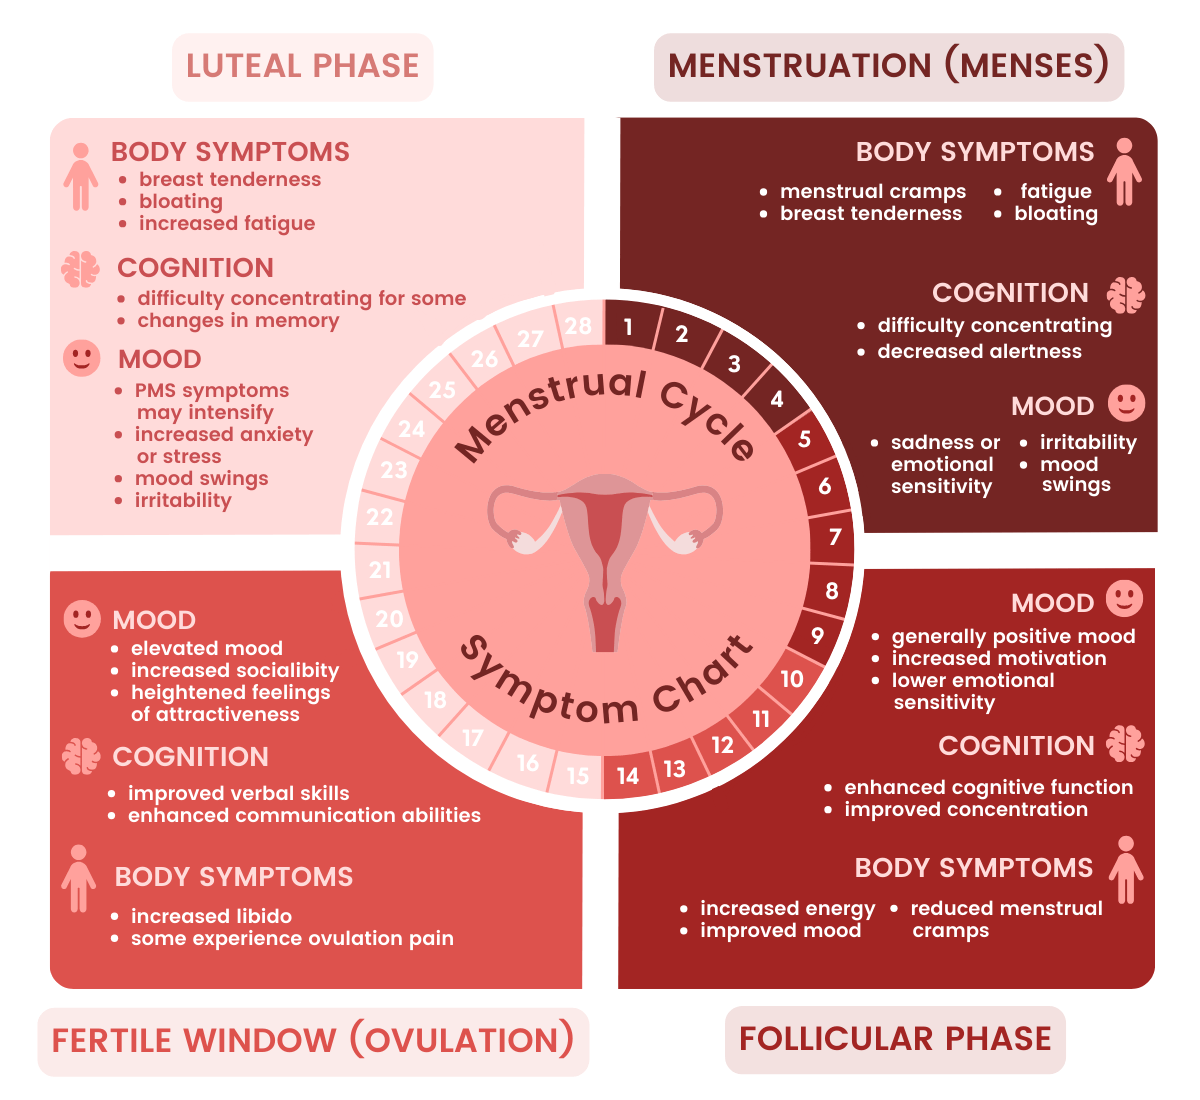 An infographic showing common symptoms associated with each phase of the menstrual cycle.